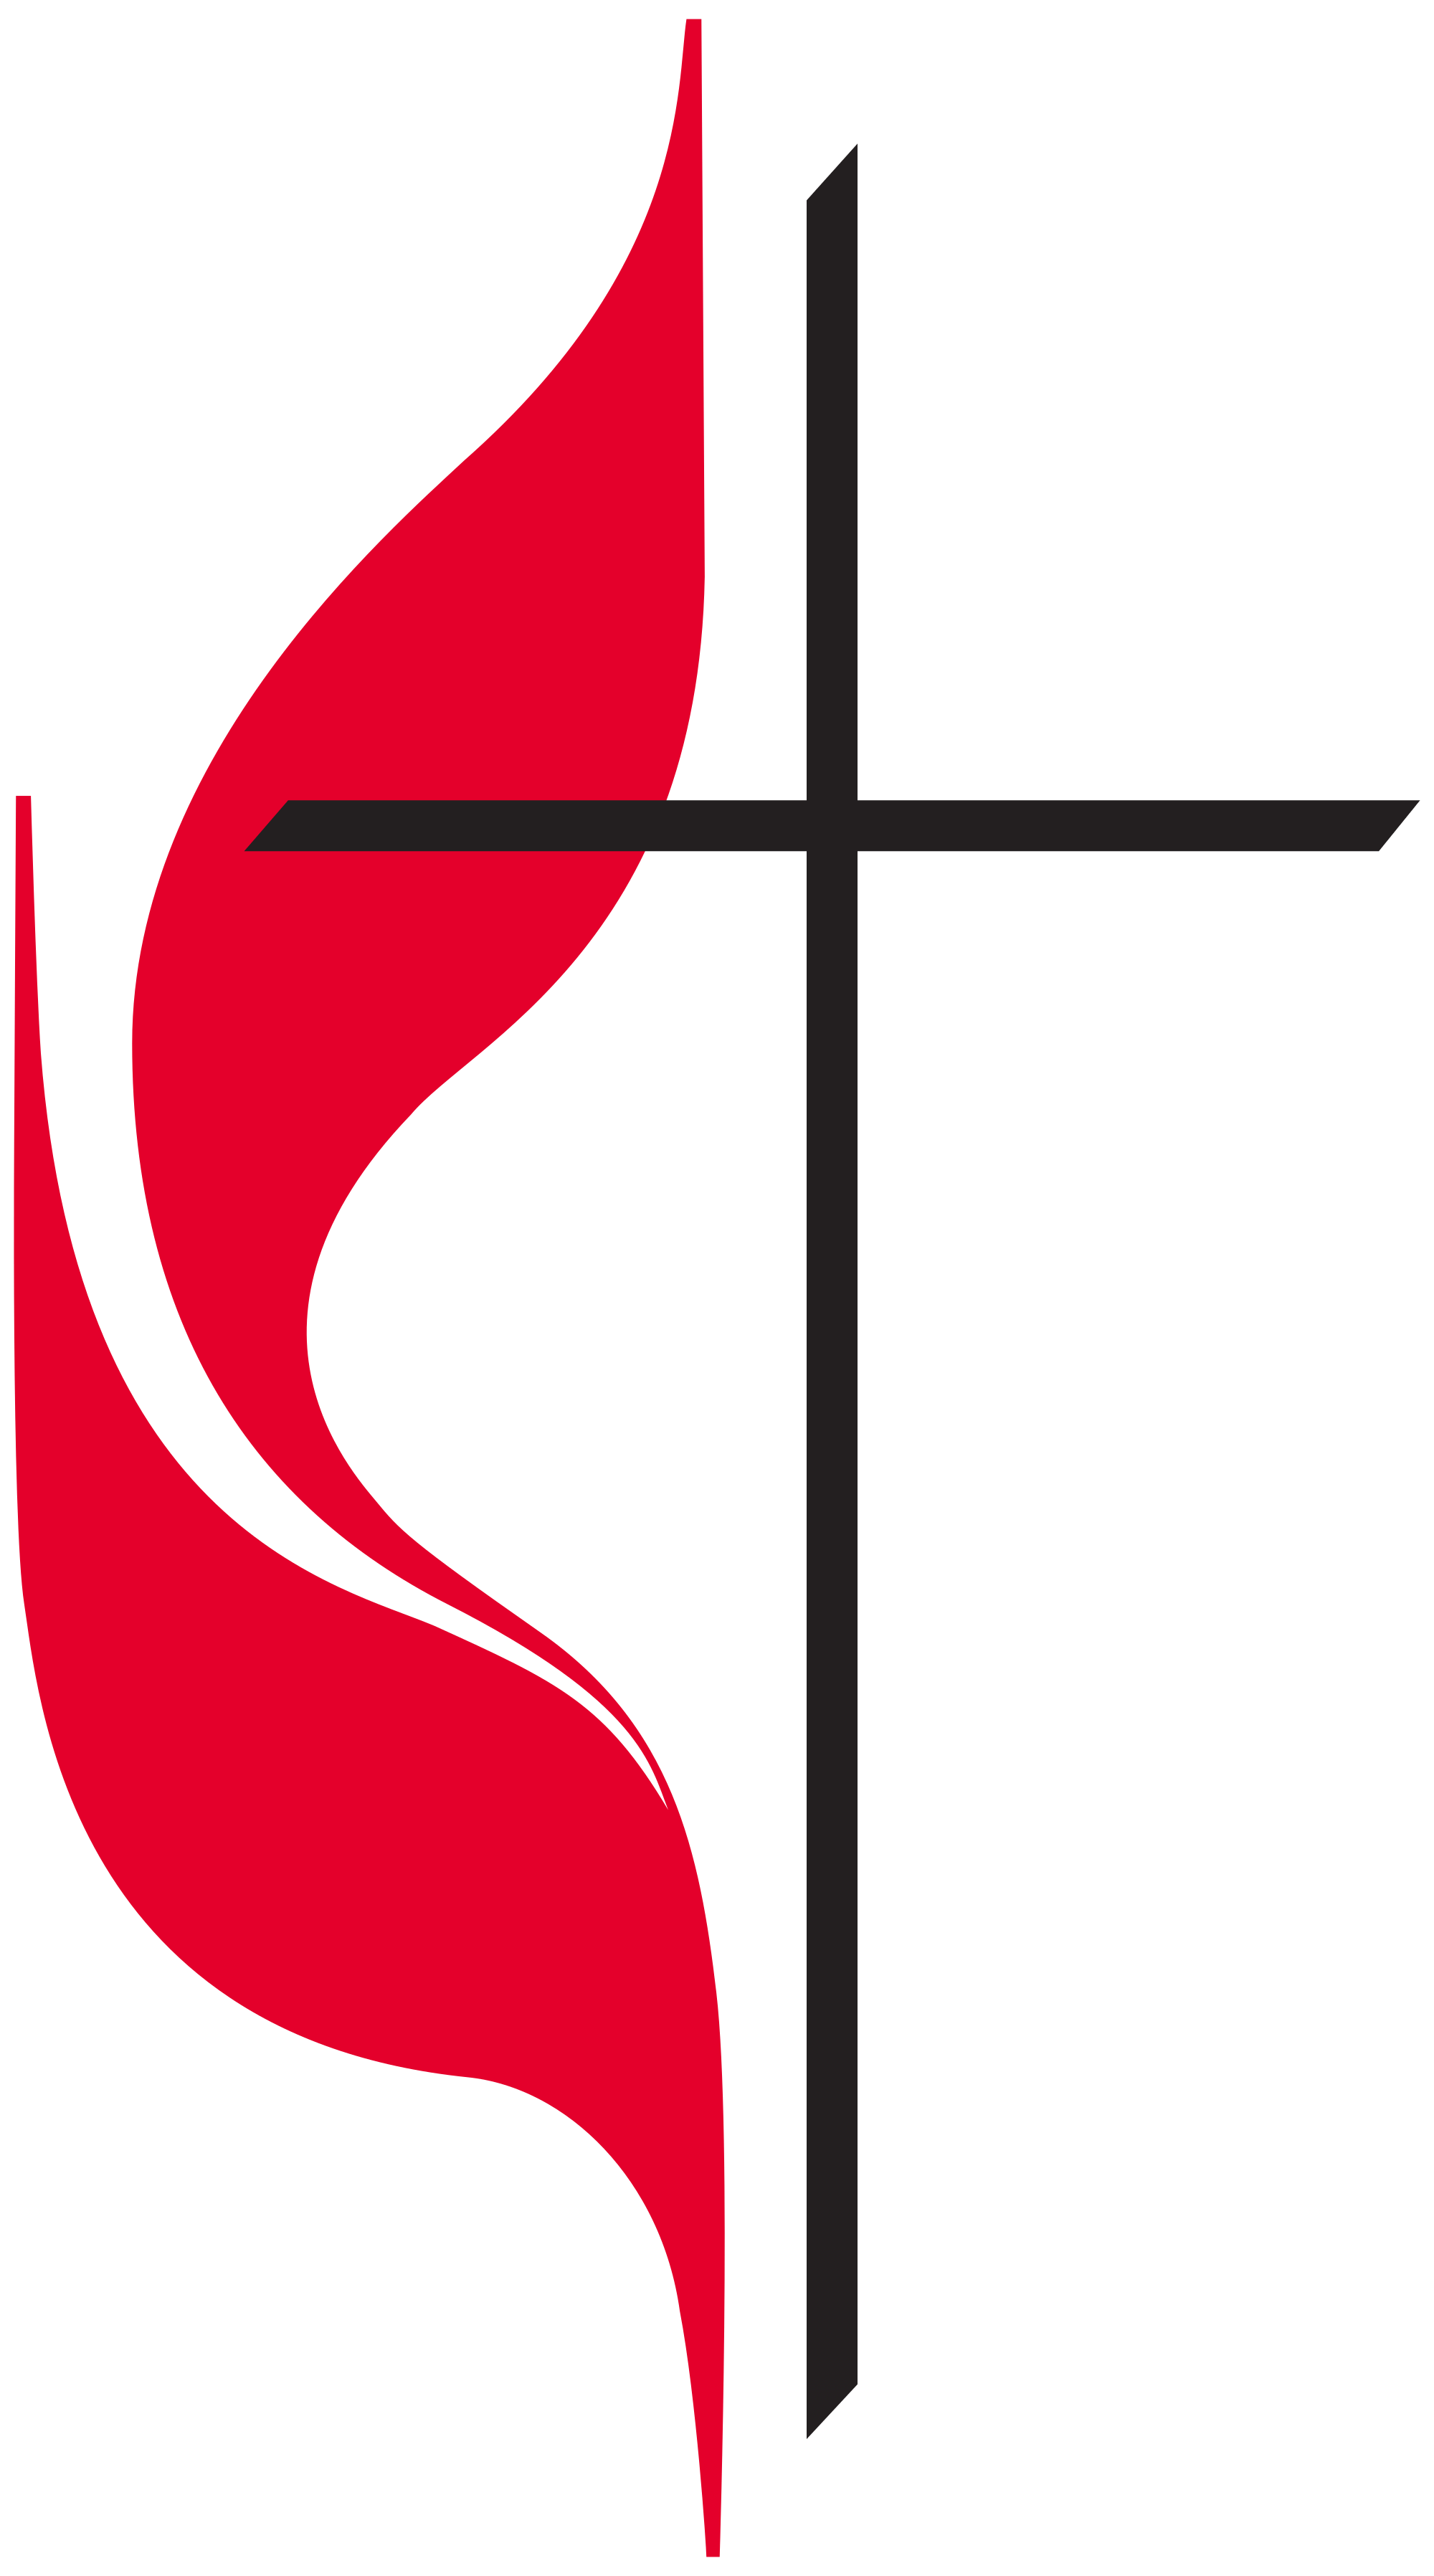 Red and Grey Church Logo - Cross and flame